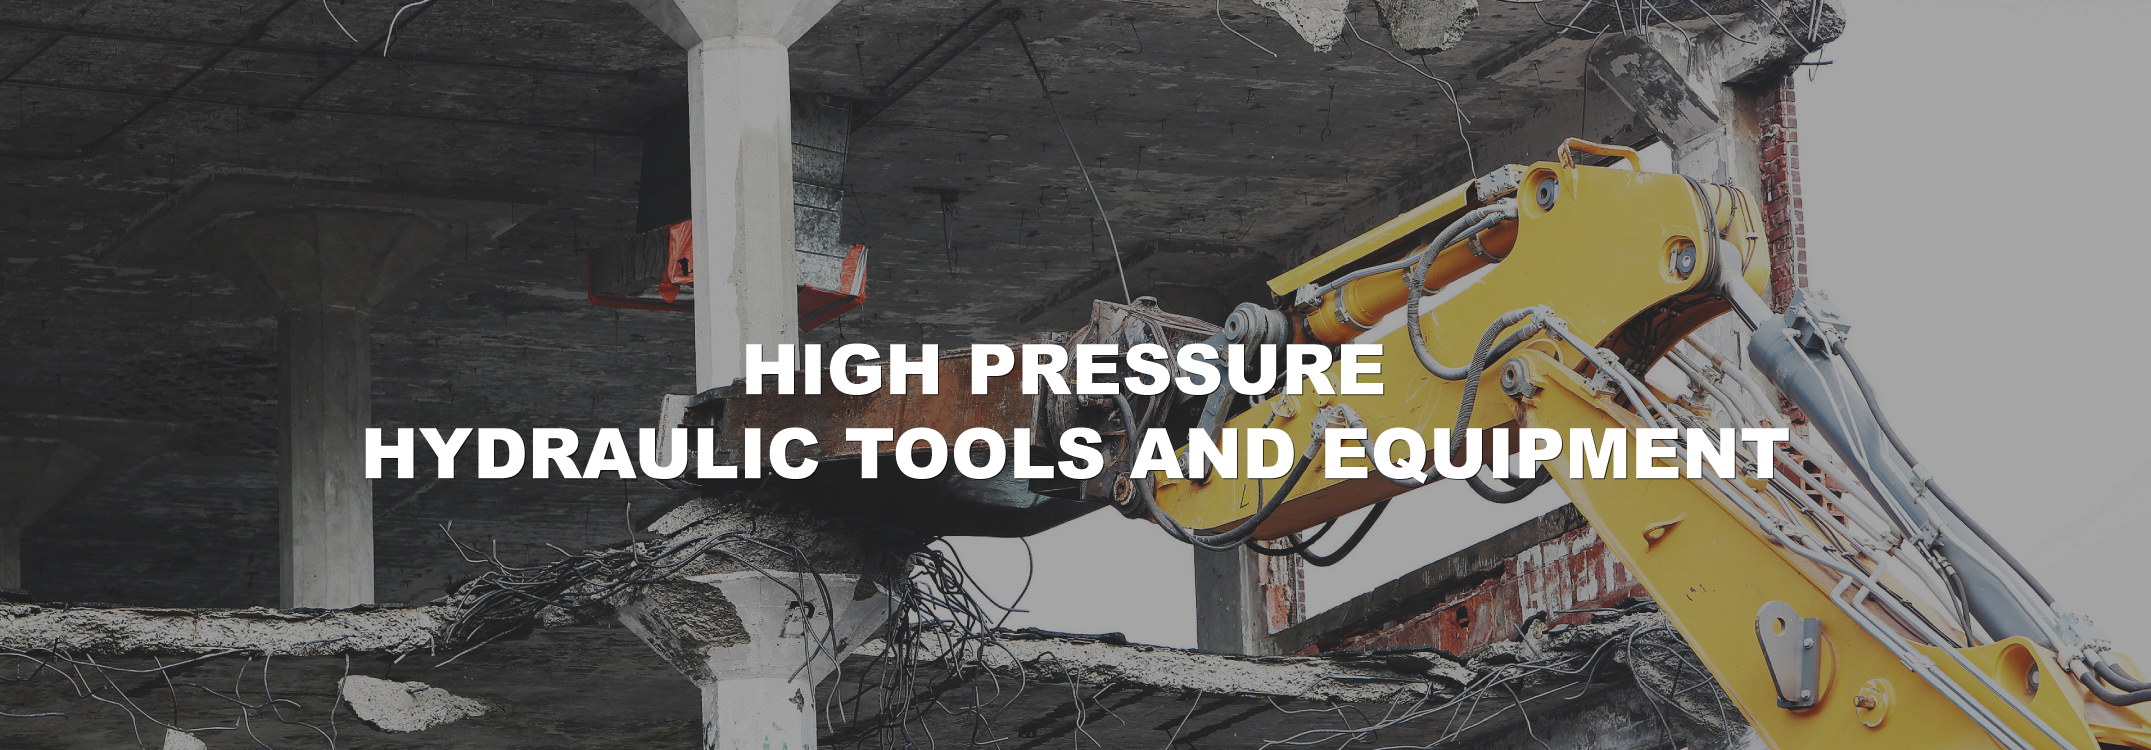 High Pressure Hydraulic Tools and Equipment